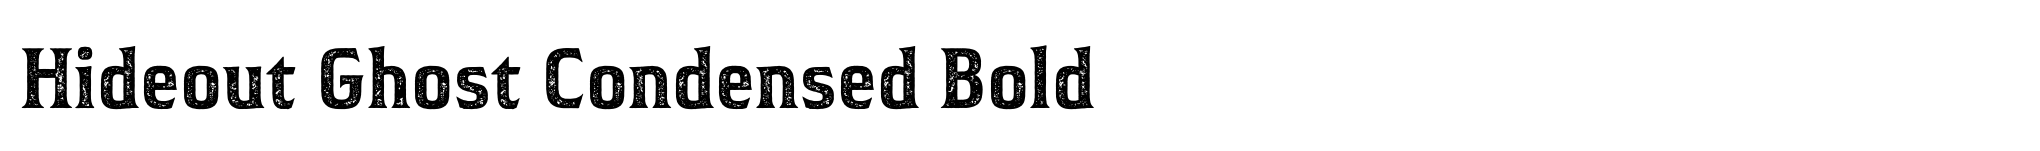 Hideout Ghost Condensed Bold image